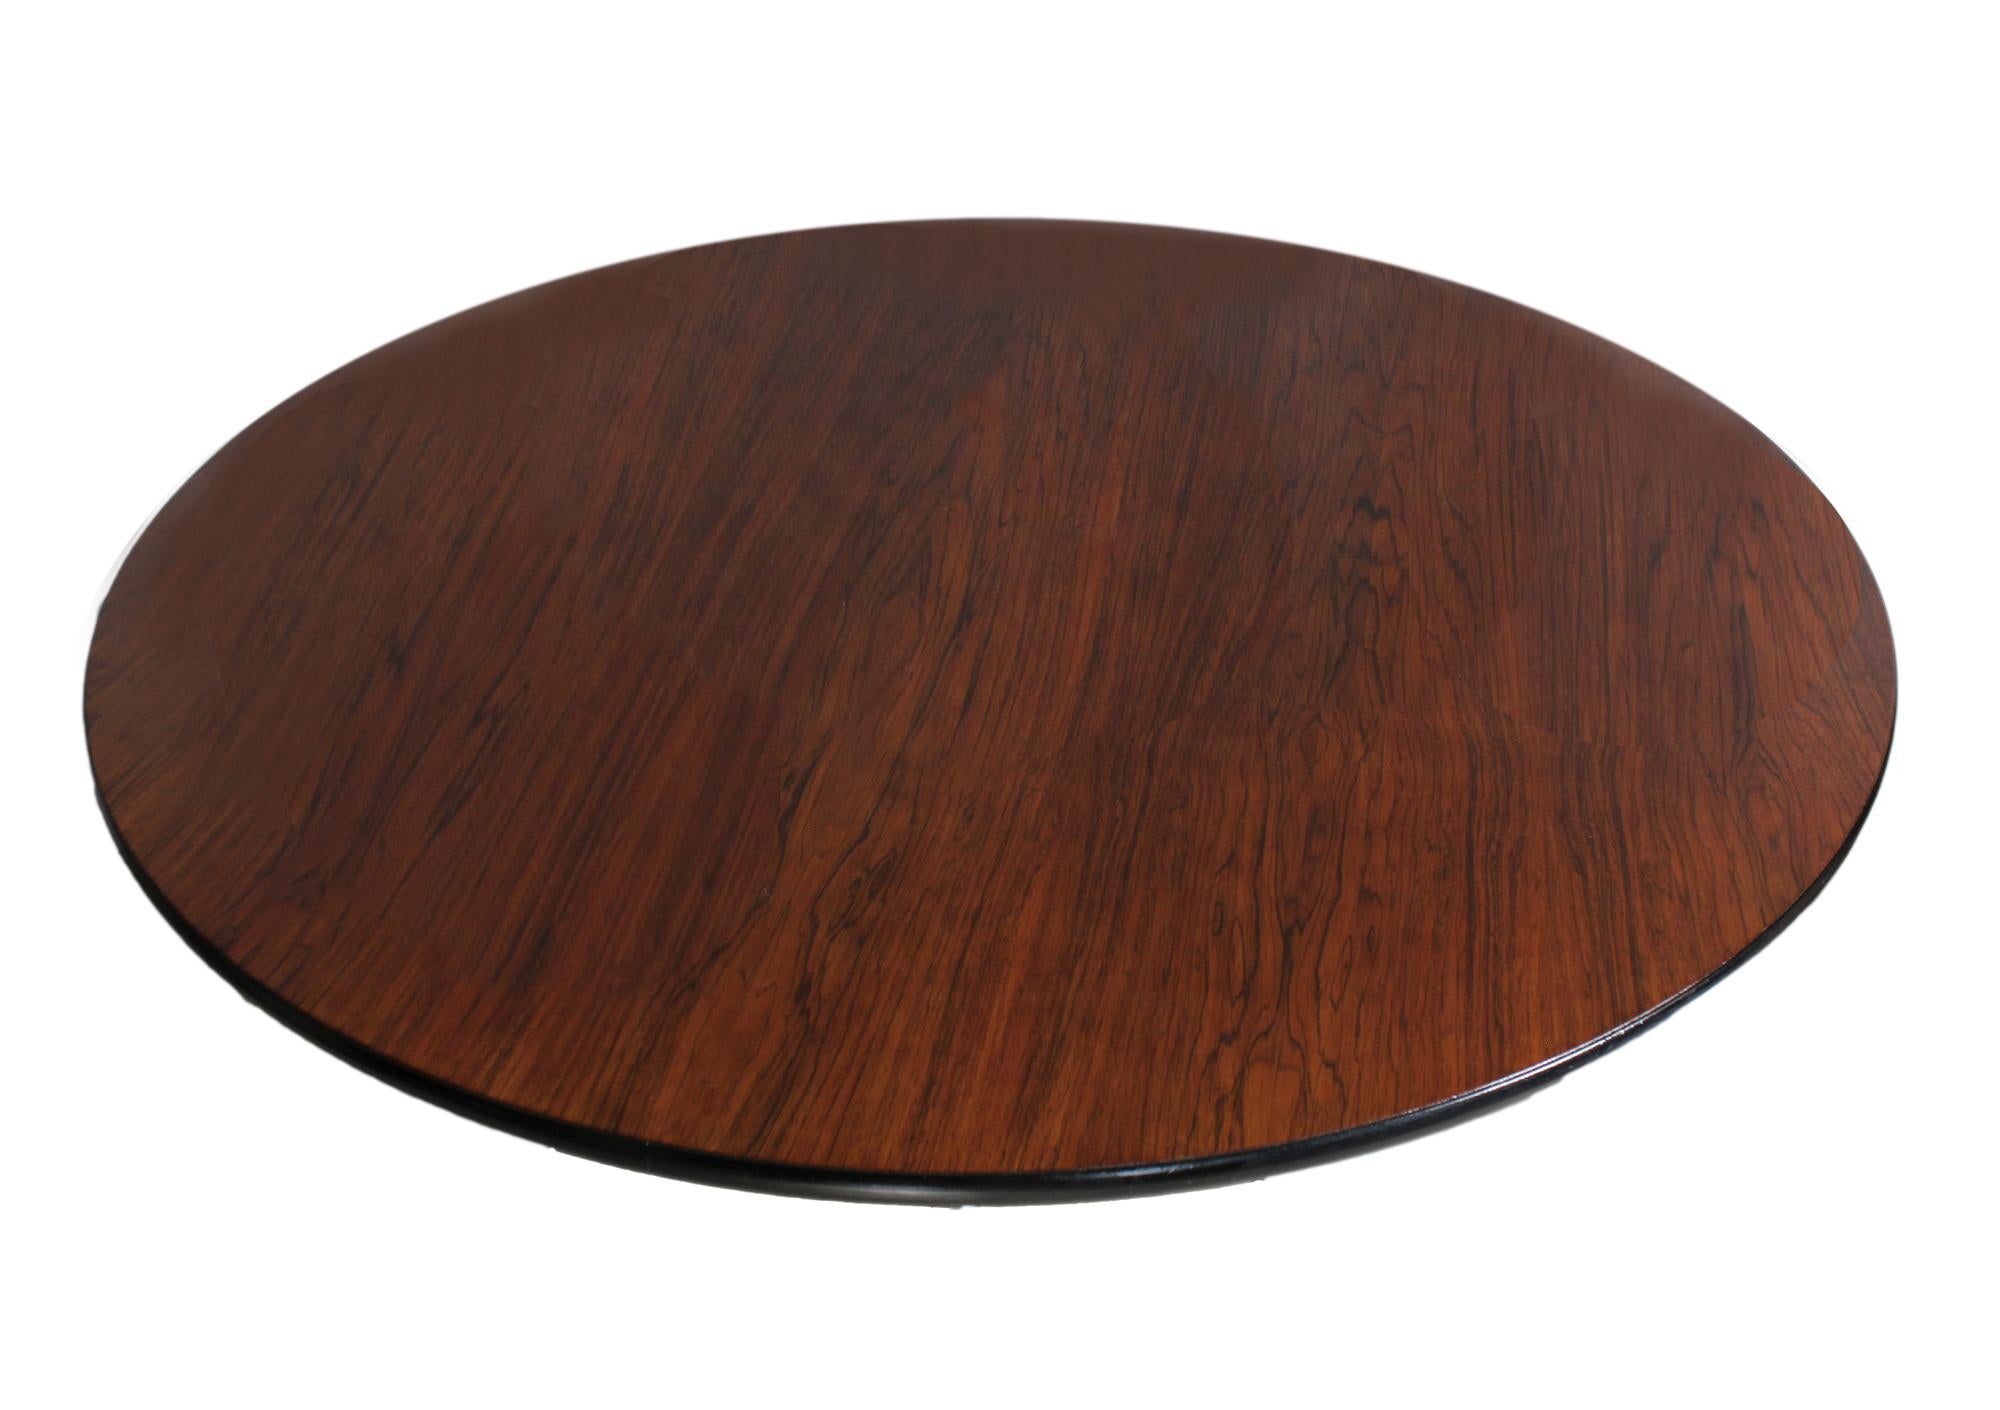 Mid-Century Modern Eames Round Rosewood Table with Original Accessories